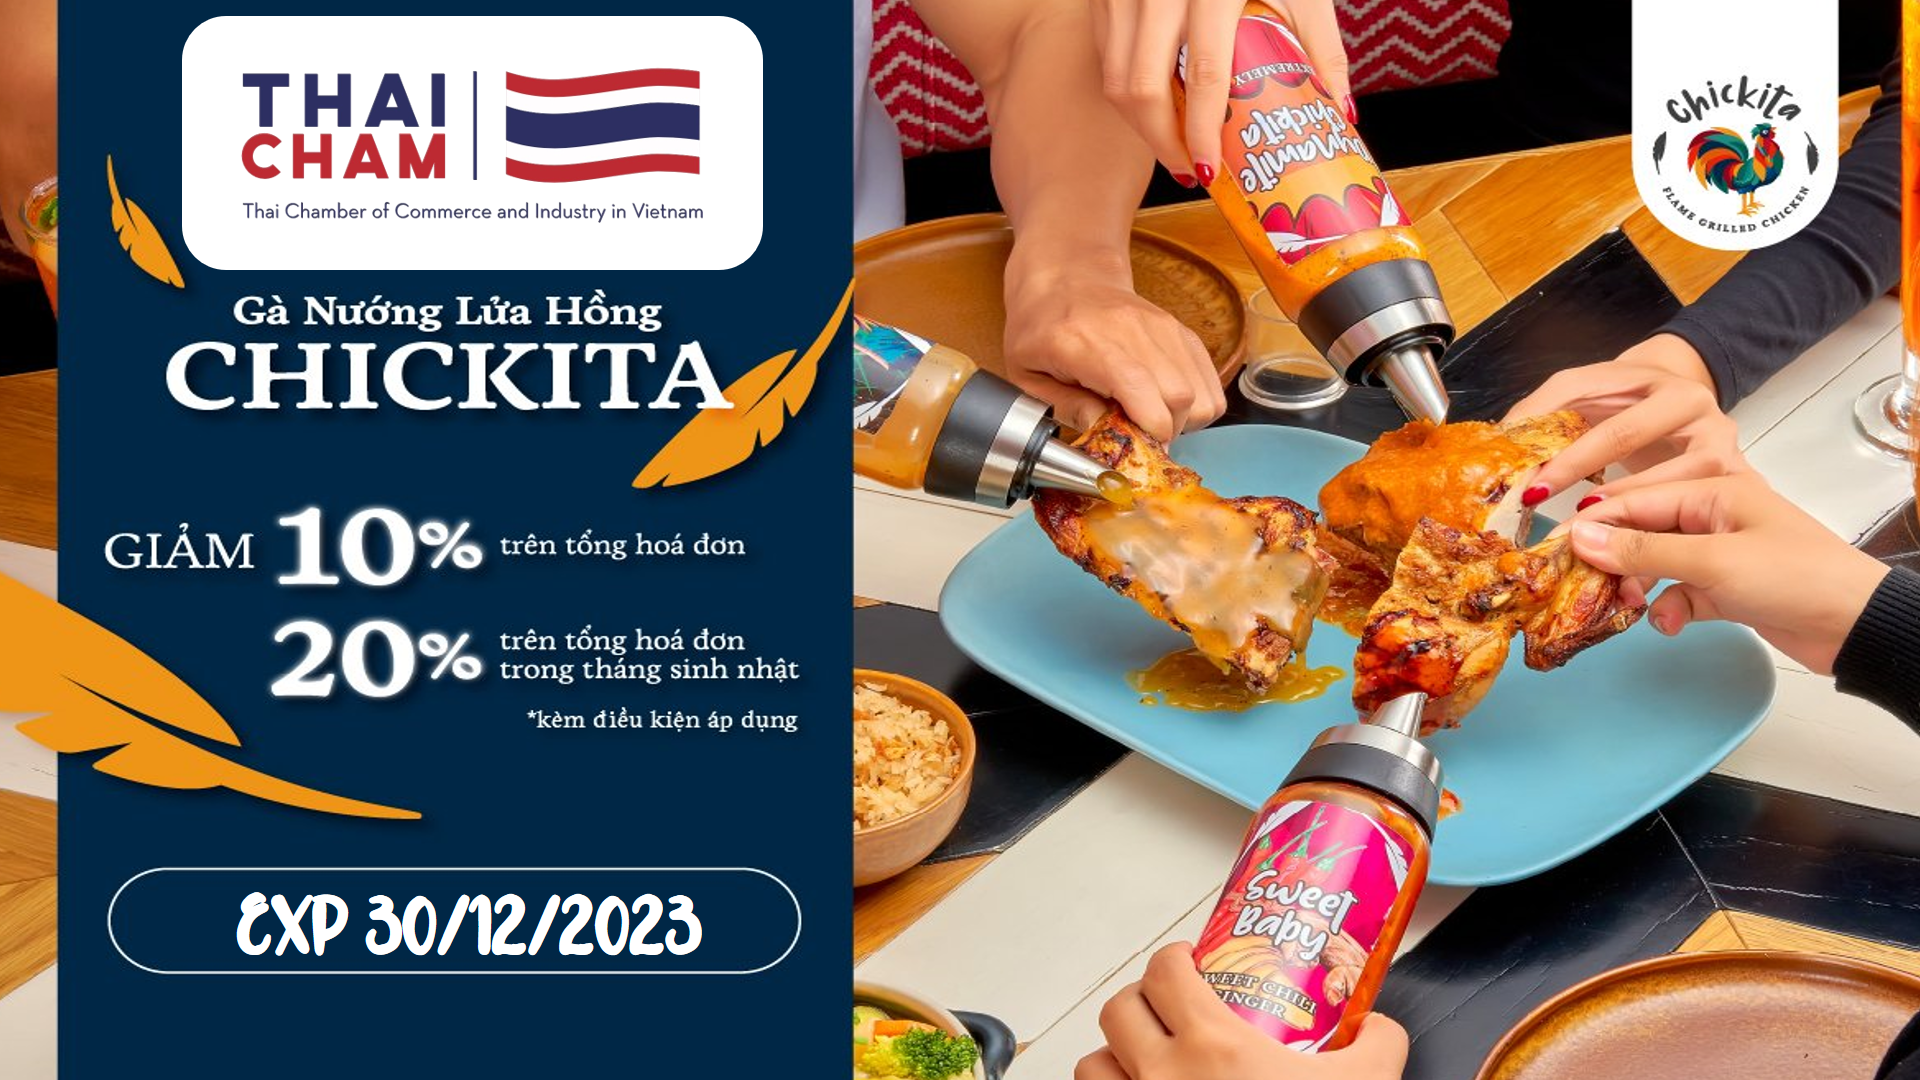 Chickita Discount